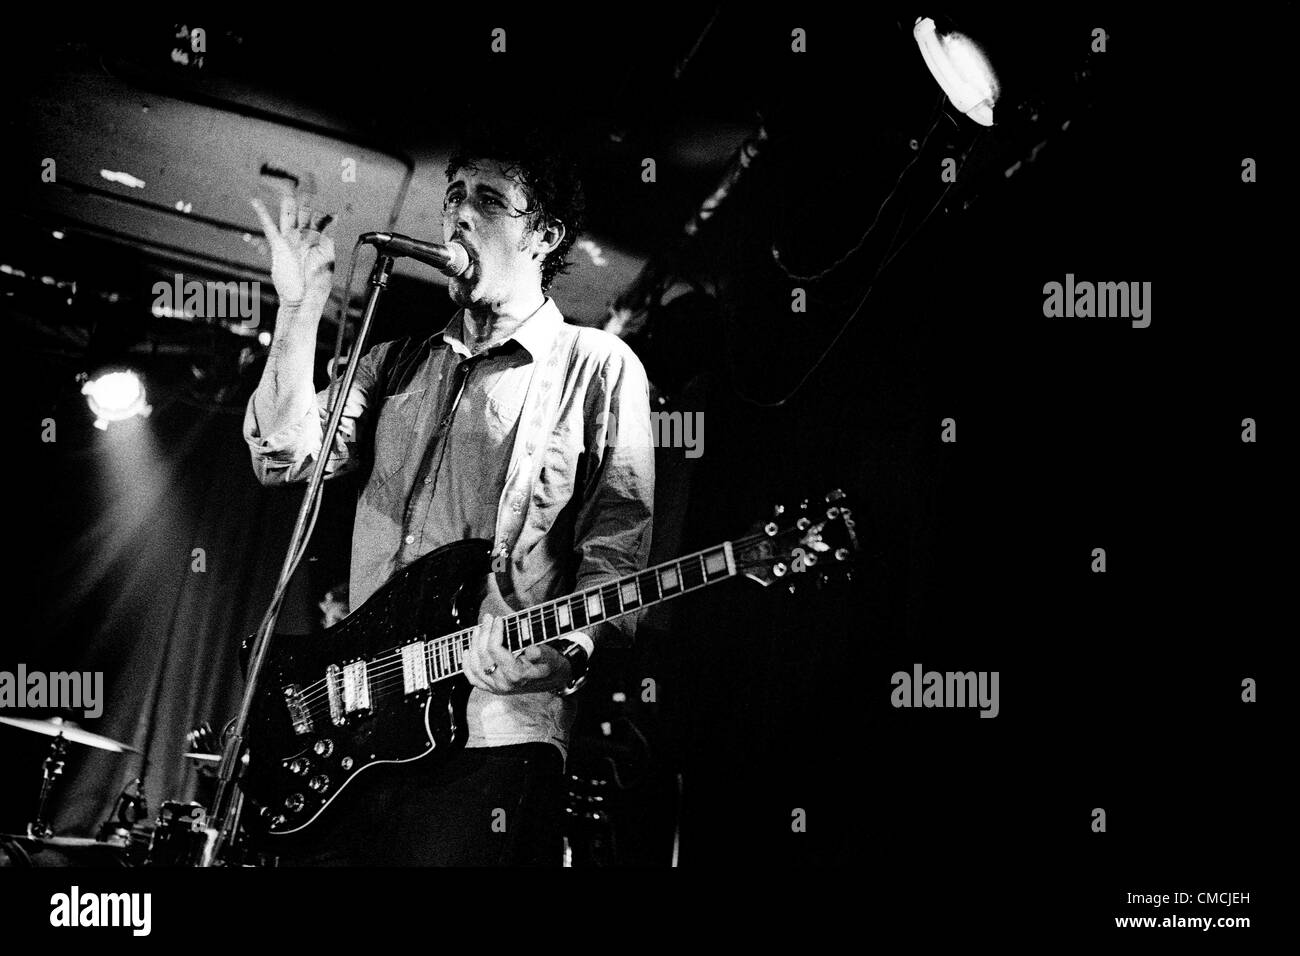 Chicago, Ill, U.S - IAN SAINT PE of The Black Lips performs at The Empty Bottle. (Credit Image: © Andrew A. Nelles/ZUMAPRESS.com) Stock Photo